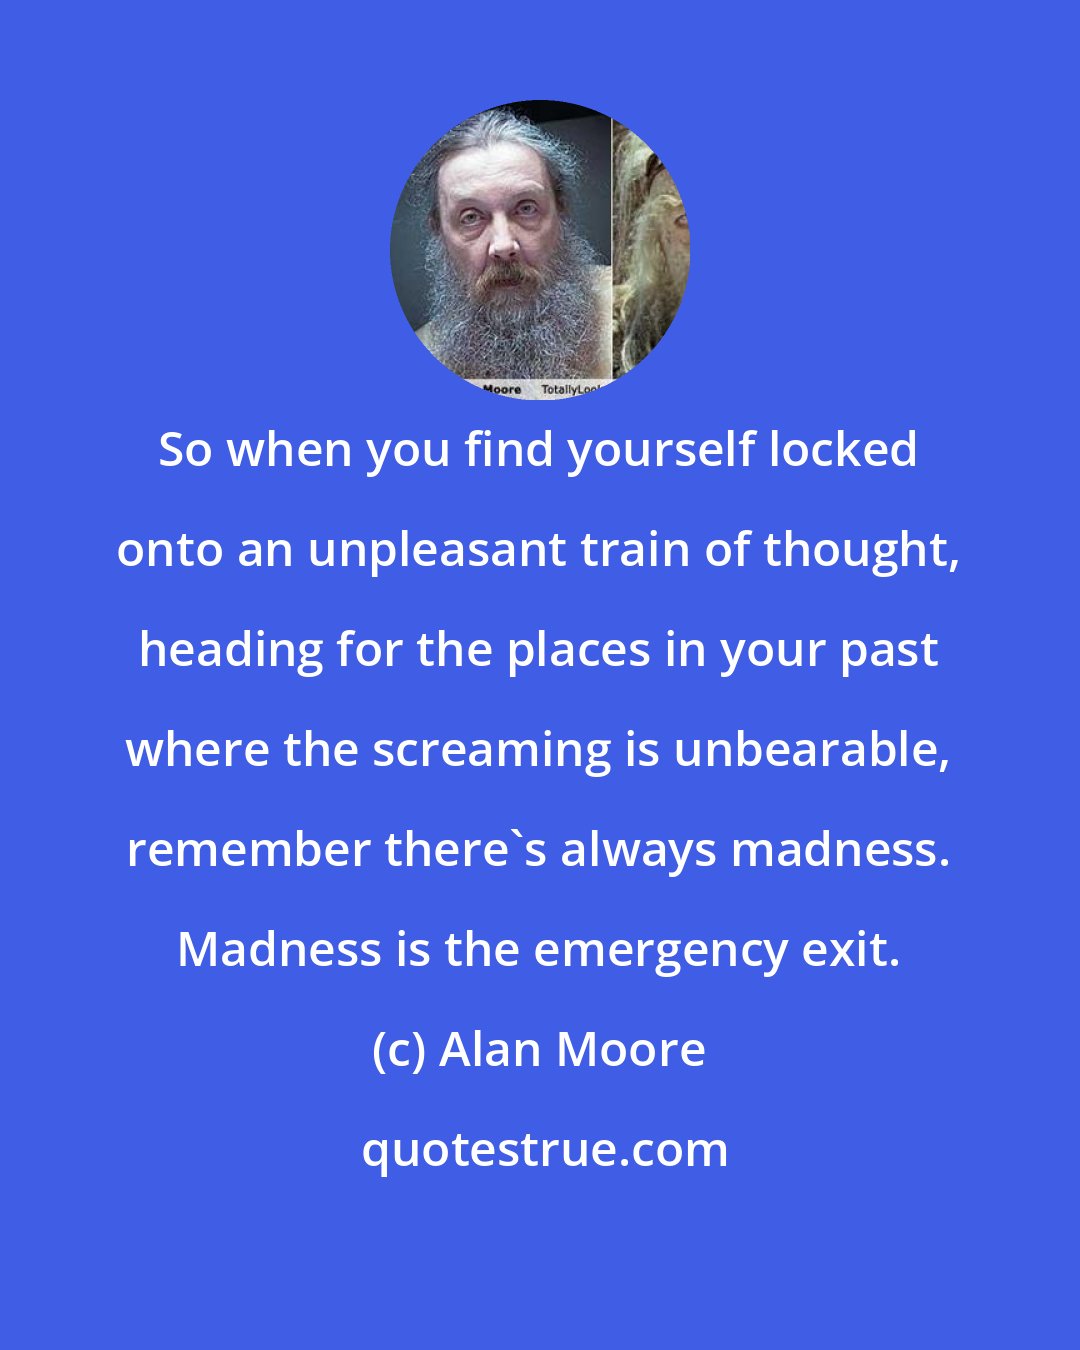 Alan Moore: So when you find yourself locked onto an unpleasant train of thought, heading for the places in your past where the screaming is unbearable, remember there's always madness. Madness is the emergency exit.